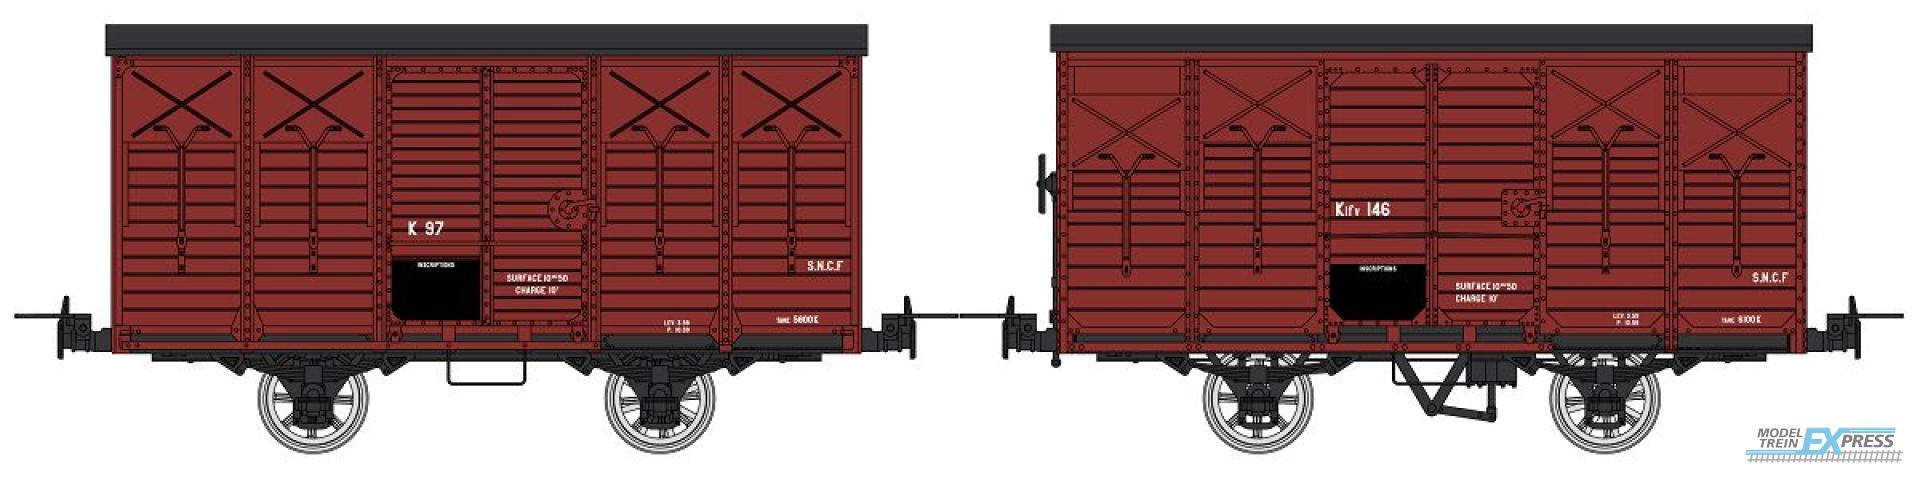 REE models VM-030 Set of 2 Covered Wagon, Round roof & roof 2 slopes, UIC Red, SNCF K 97 & Kifv 146